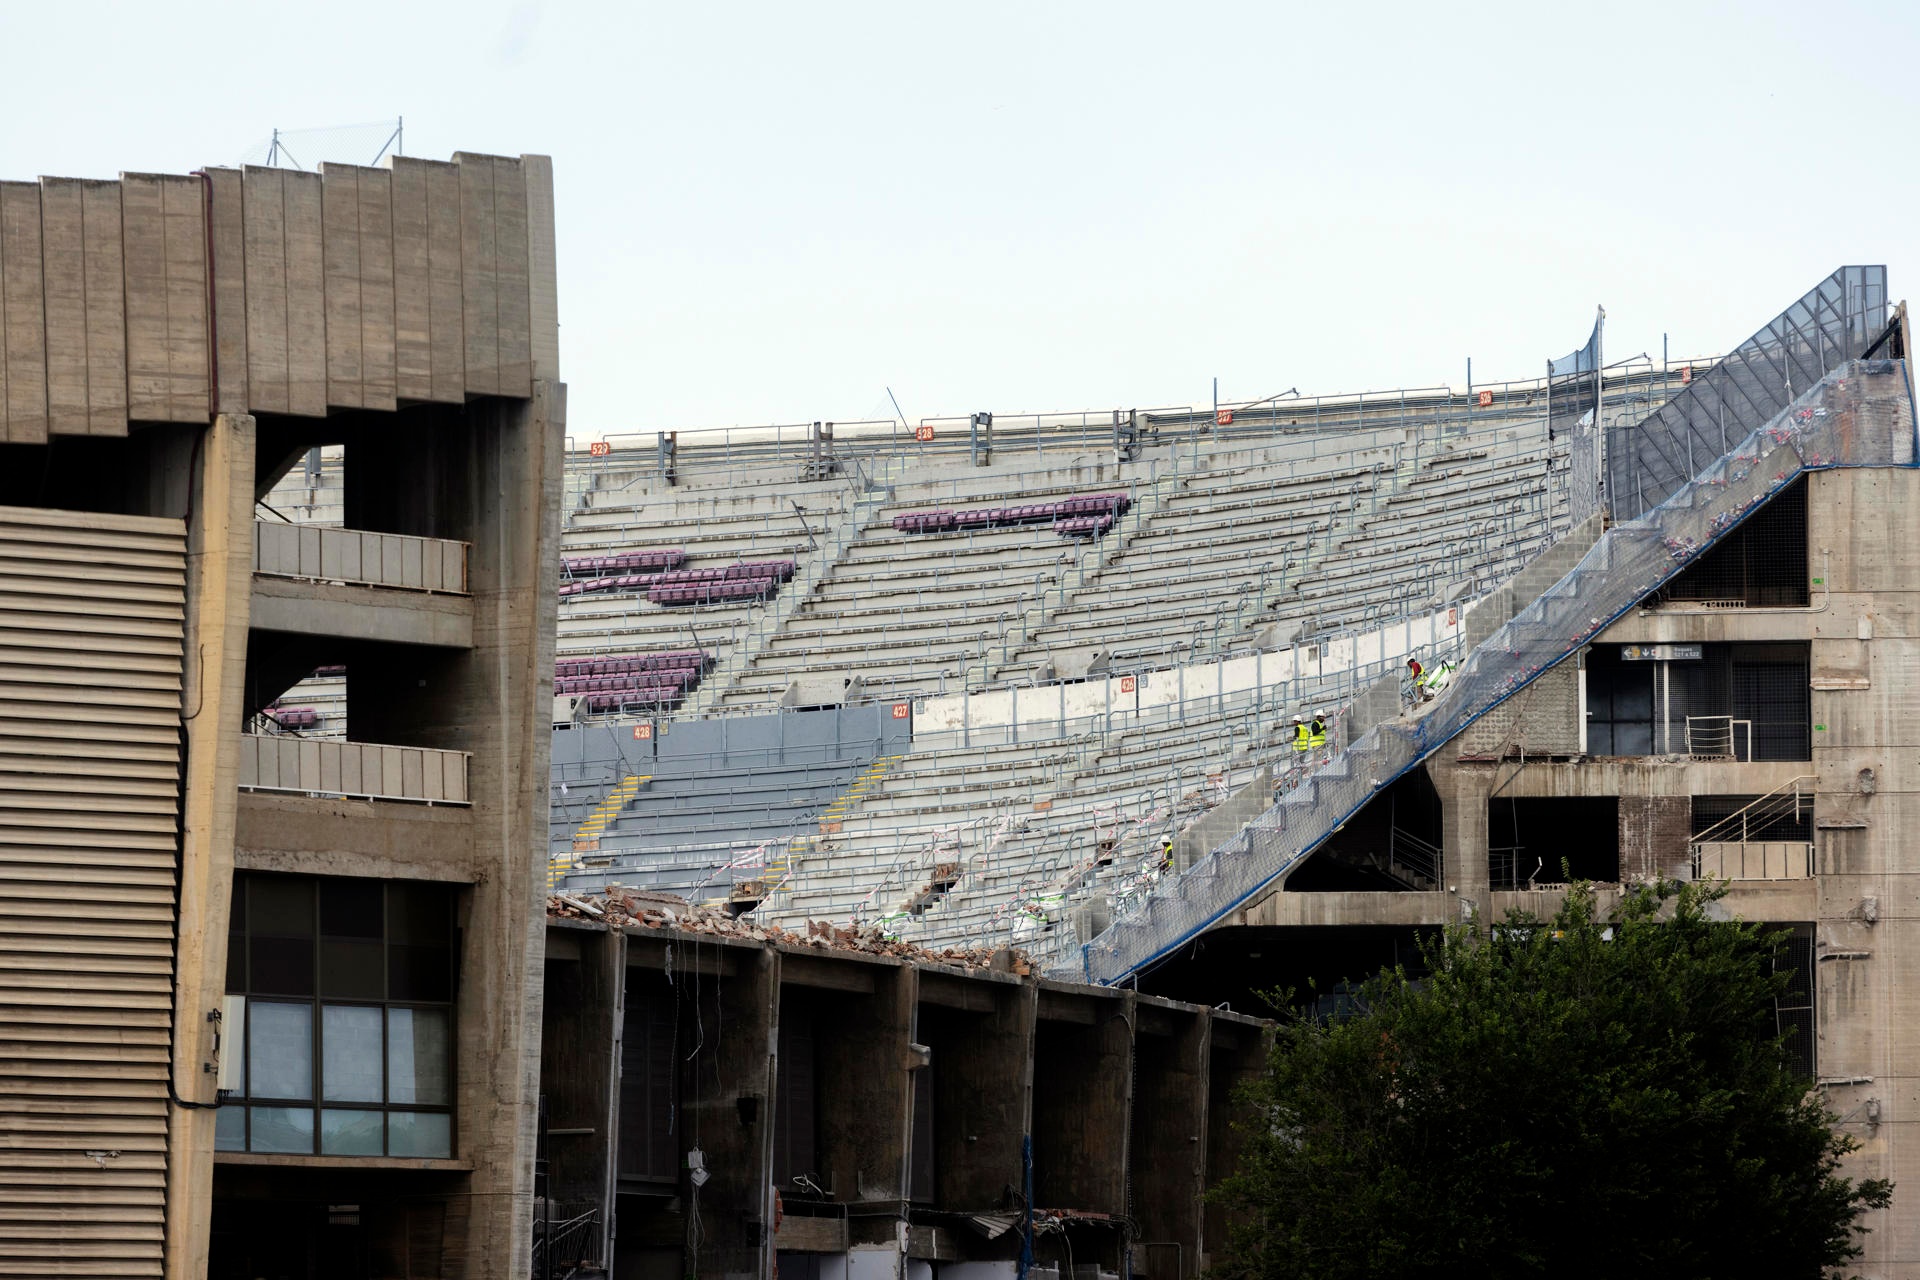 Works continue at the Spotify Camp Nou. EFE